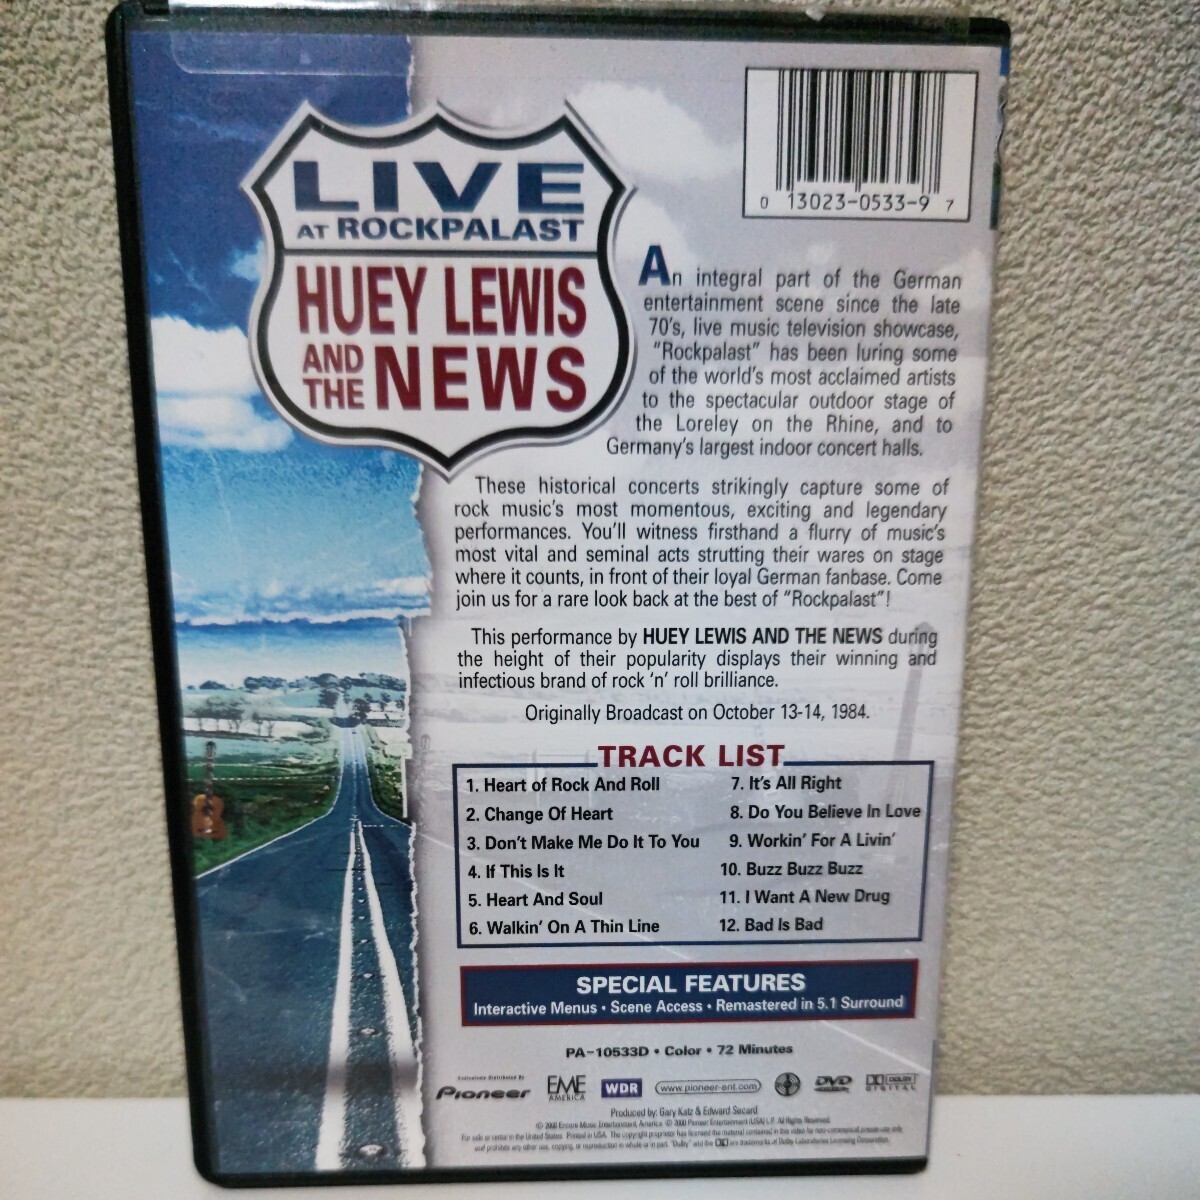 hyu-i* Lewis & The * News / lock pa last * live domestic sale foreign record DVD